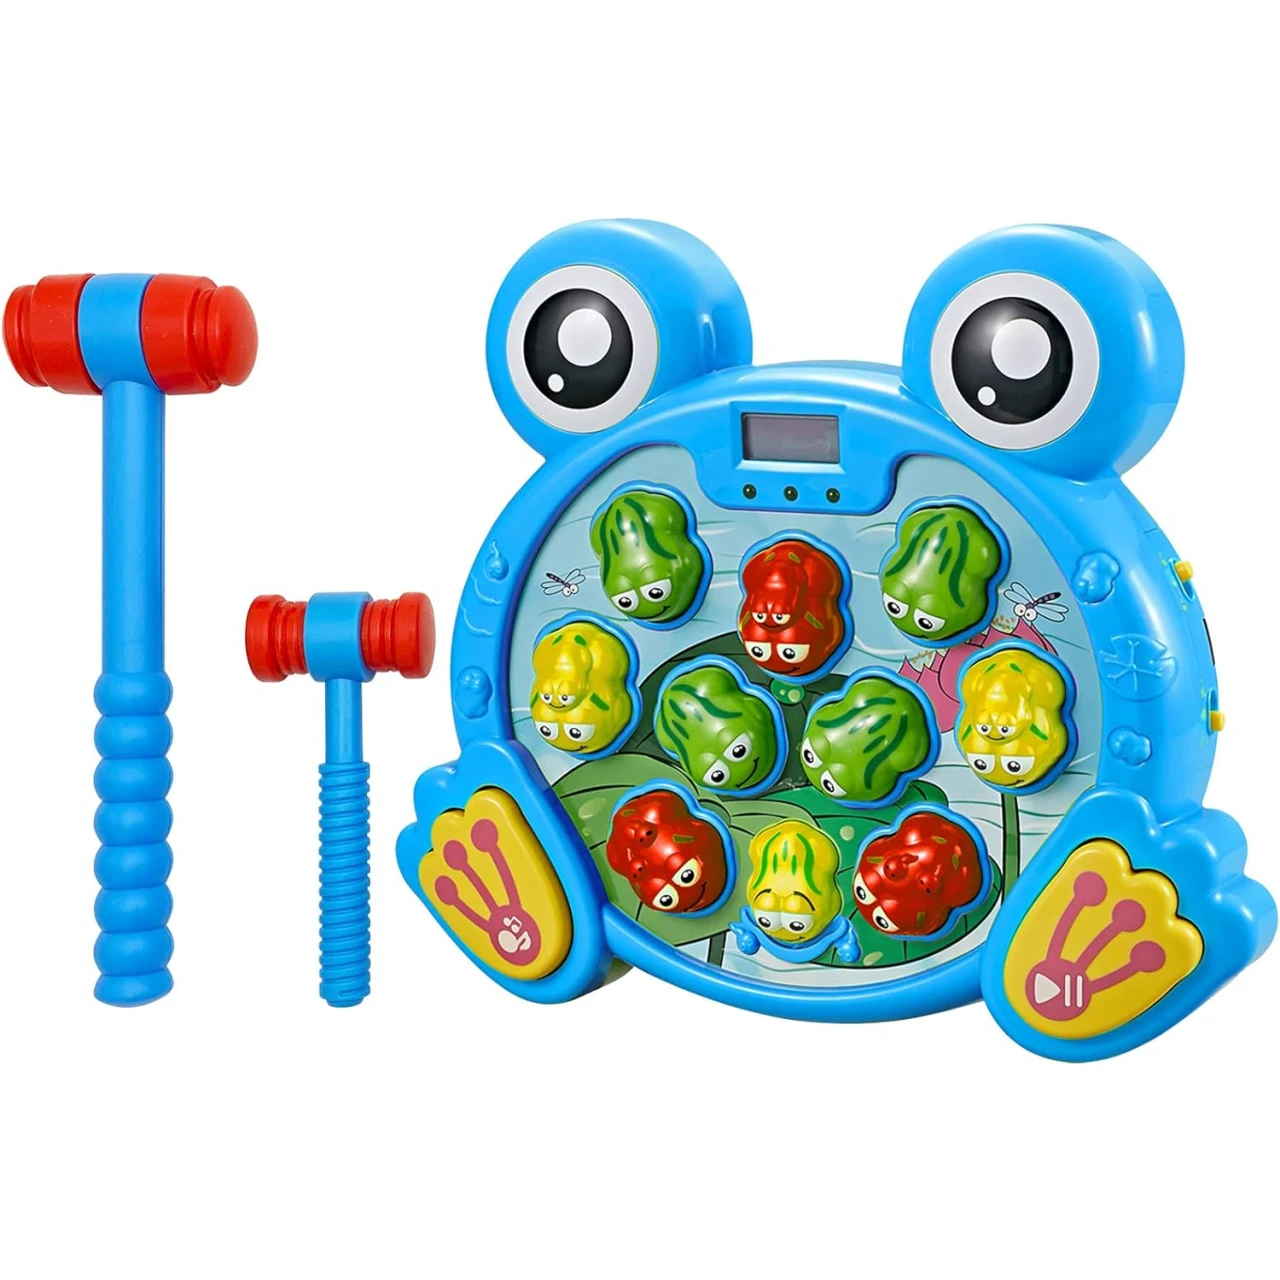 Think Gizmos - Whack A Frog Hammering Game - Great Toddler Toy for Learning &amp; Early Hand Eye Co-Ordination Development. (Blue)